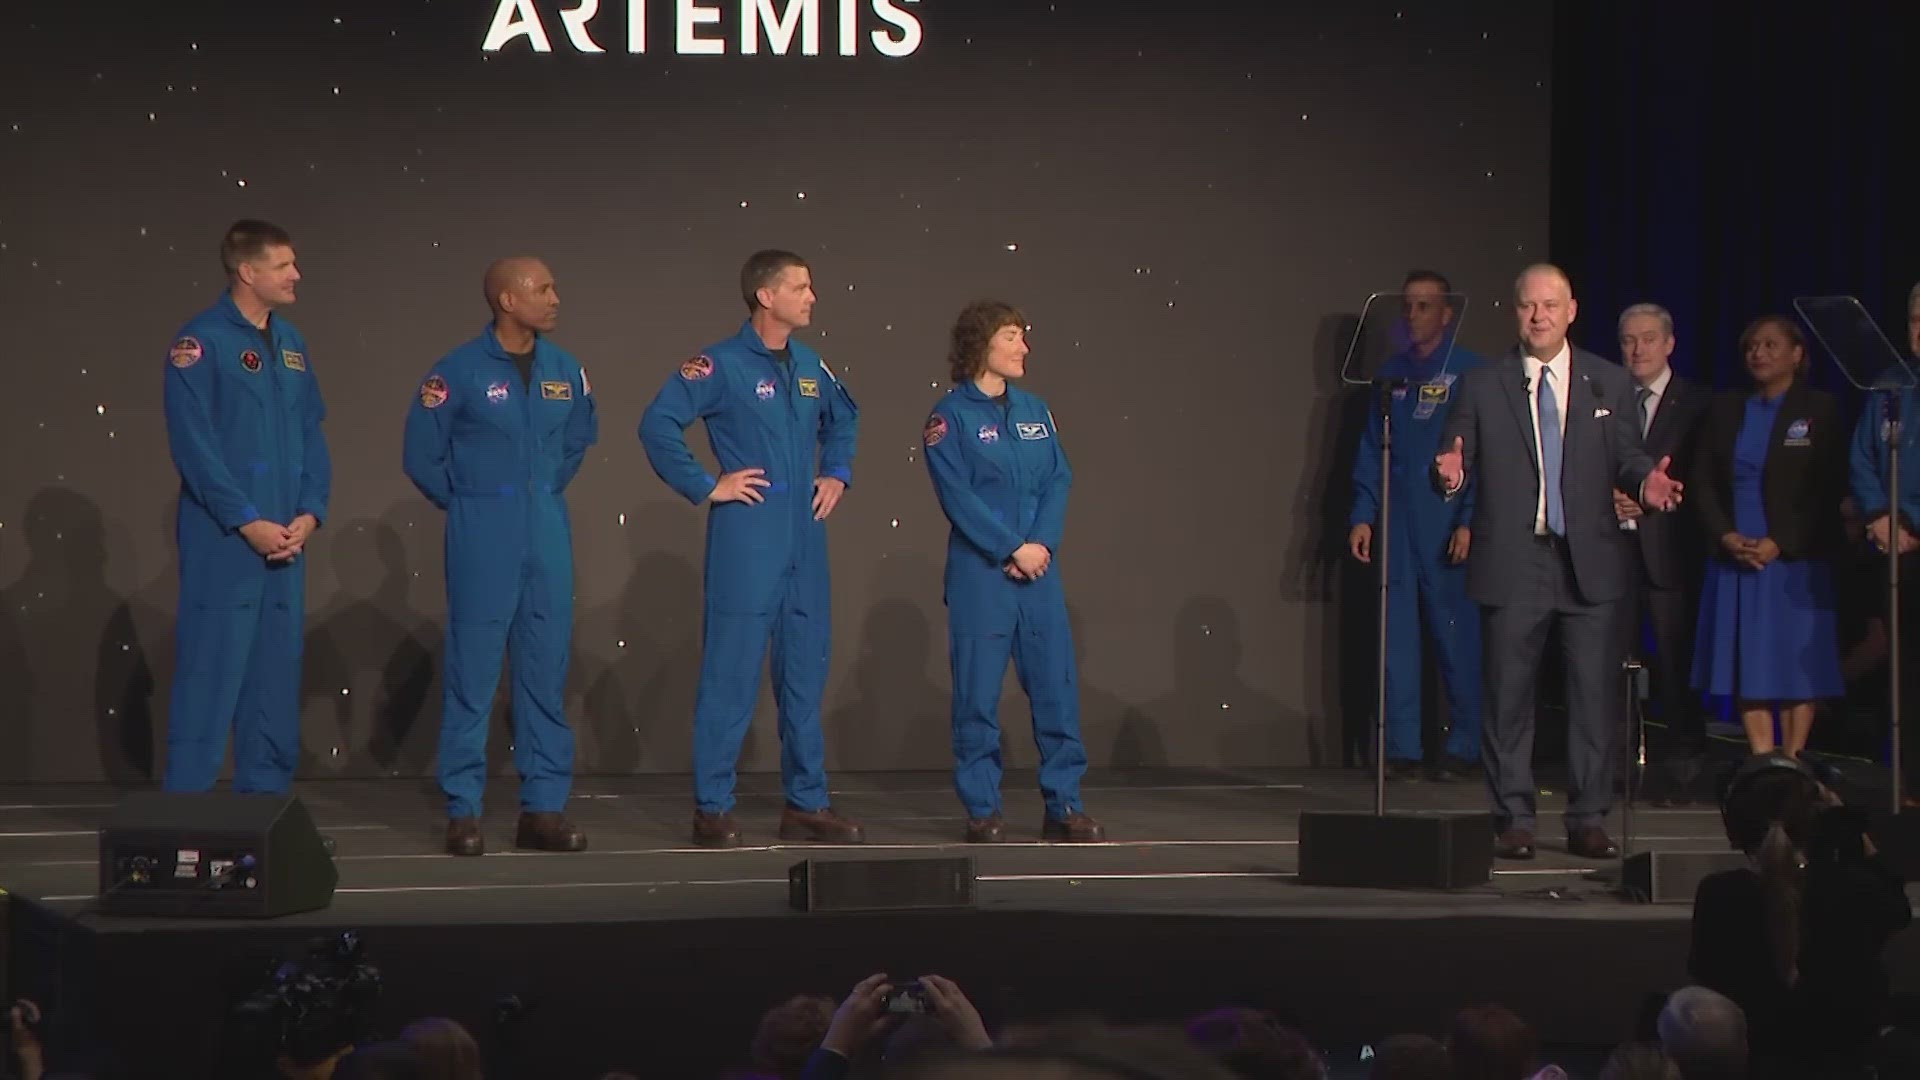 The three Americans and one Canadian were introduced during a ceremony in Houston, home to the nation's astronauts as well as Mission Control.